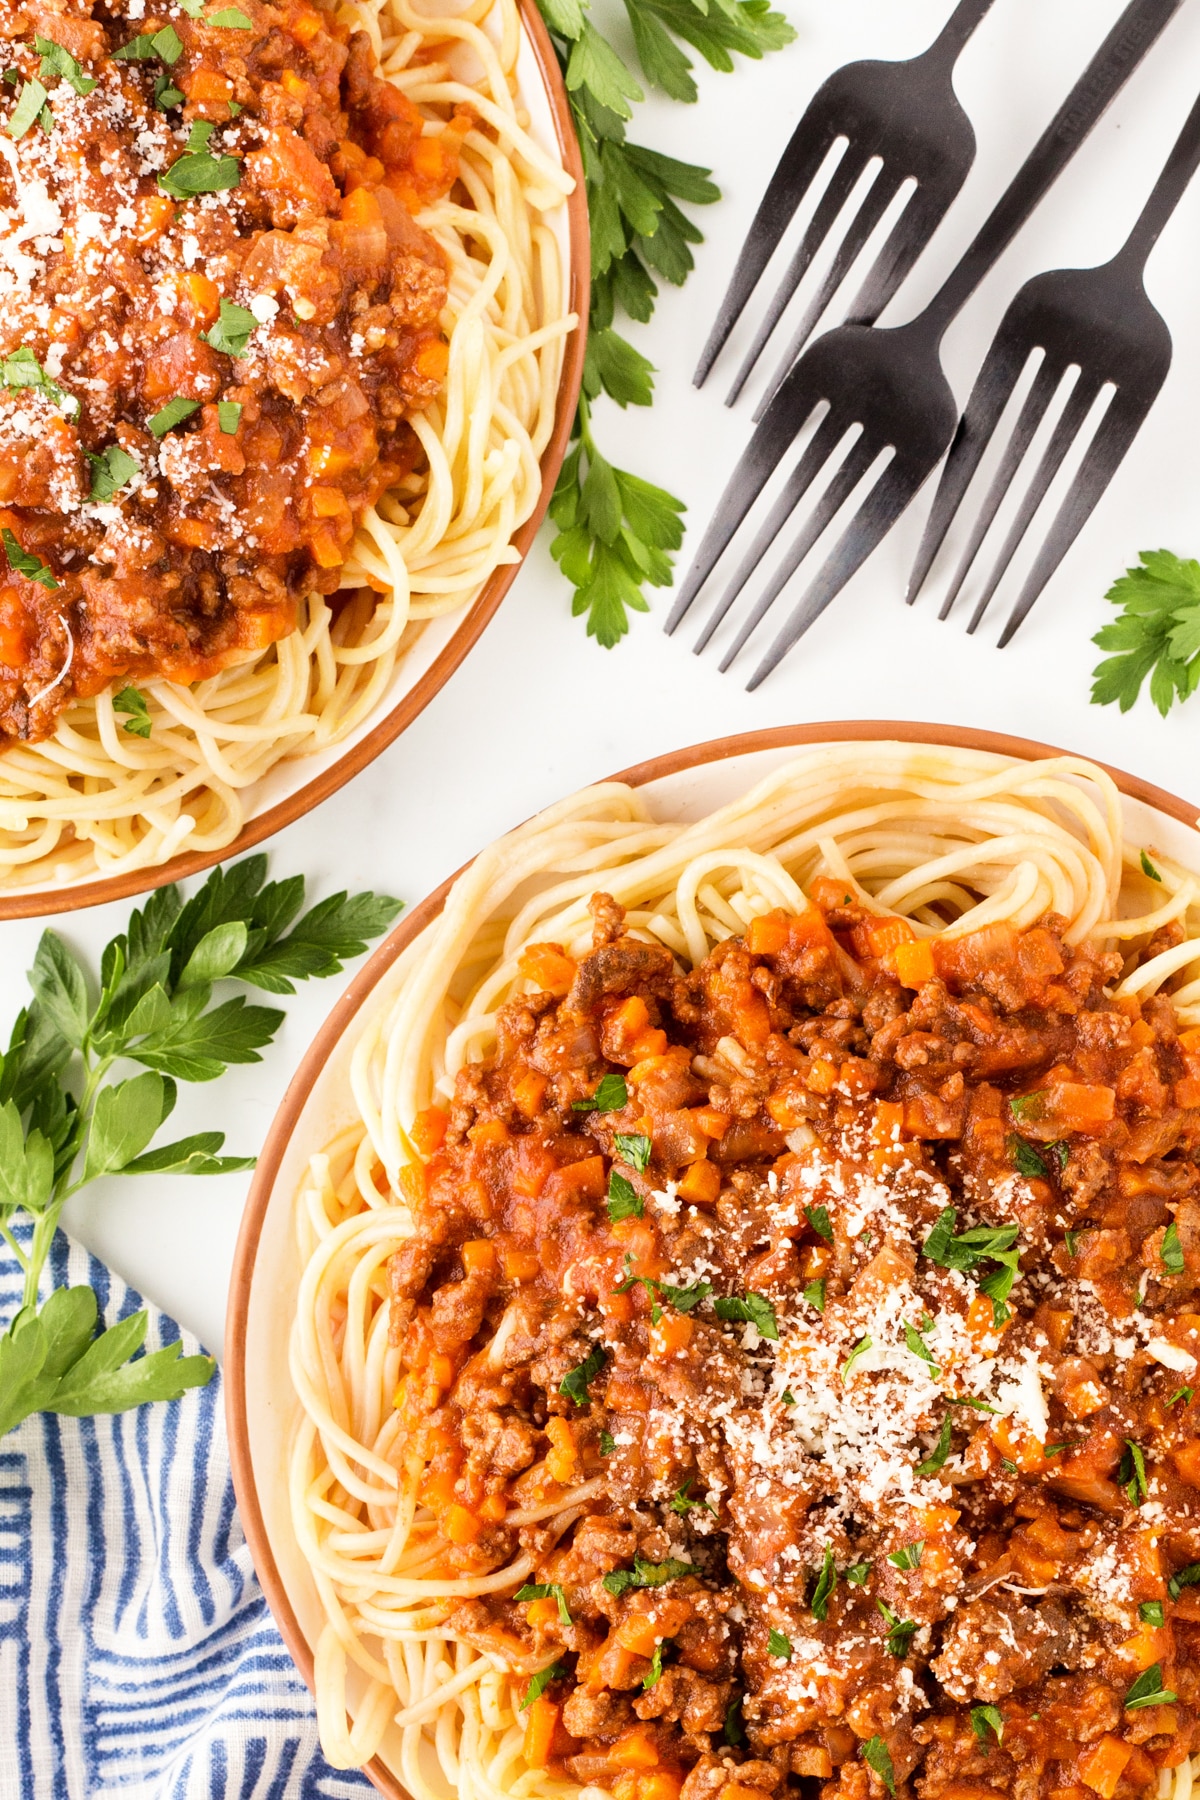 Two plates with black forks in between of spaghetti and pasta sauce. 